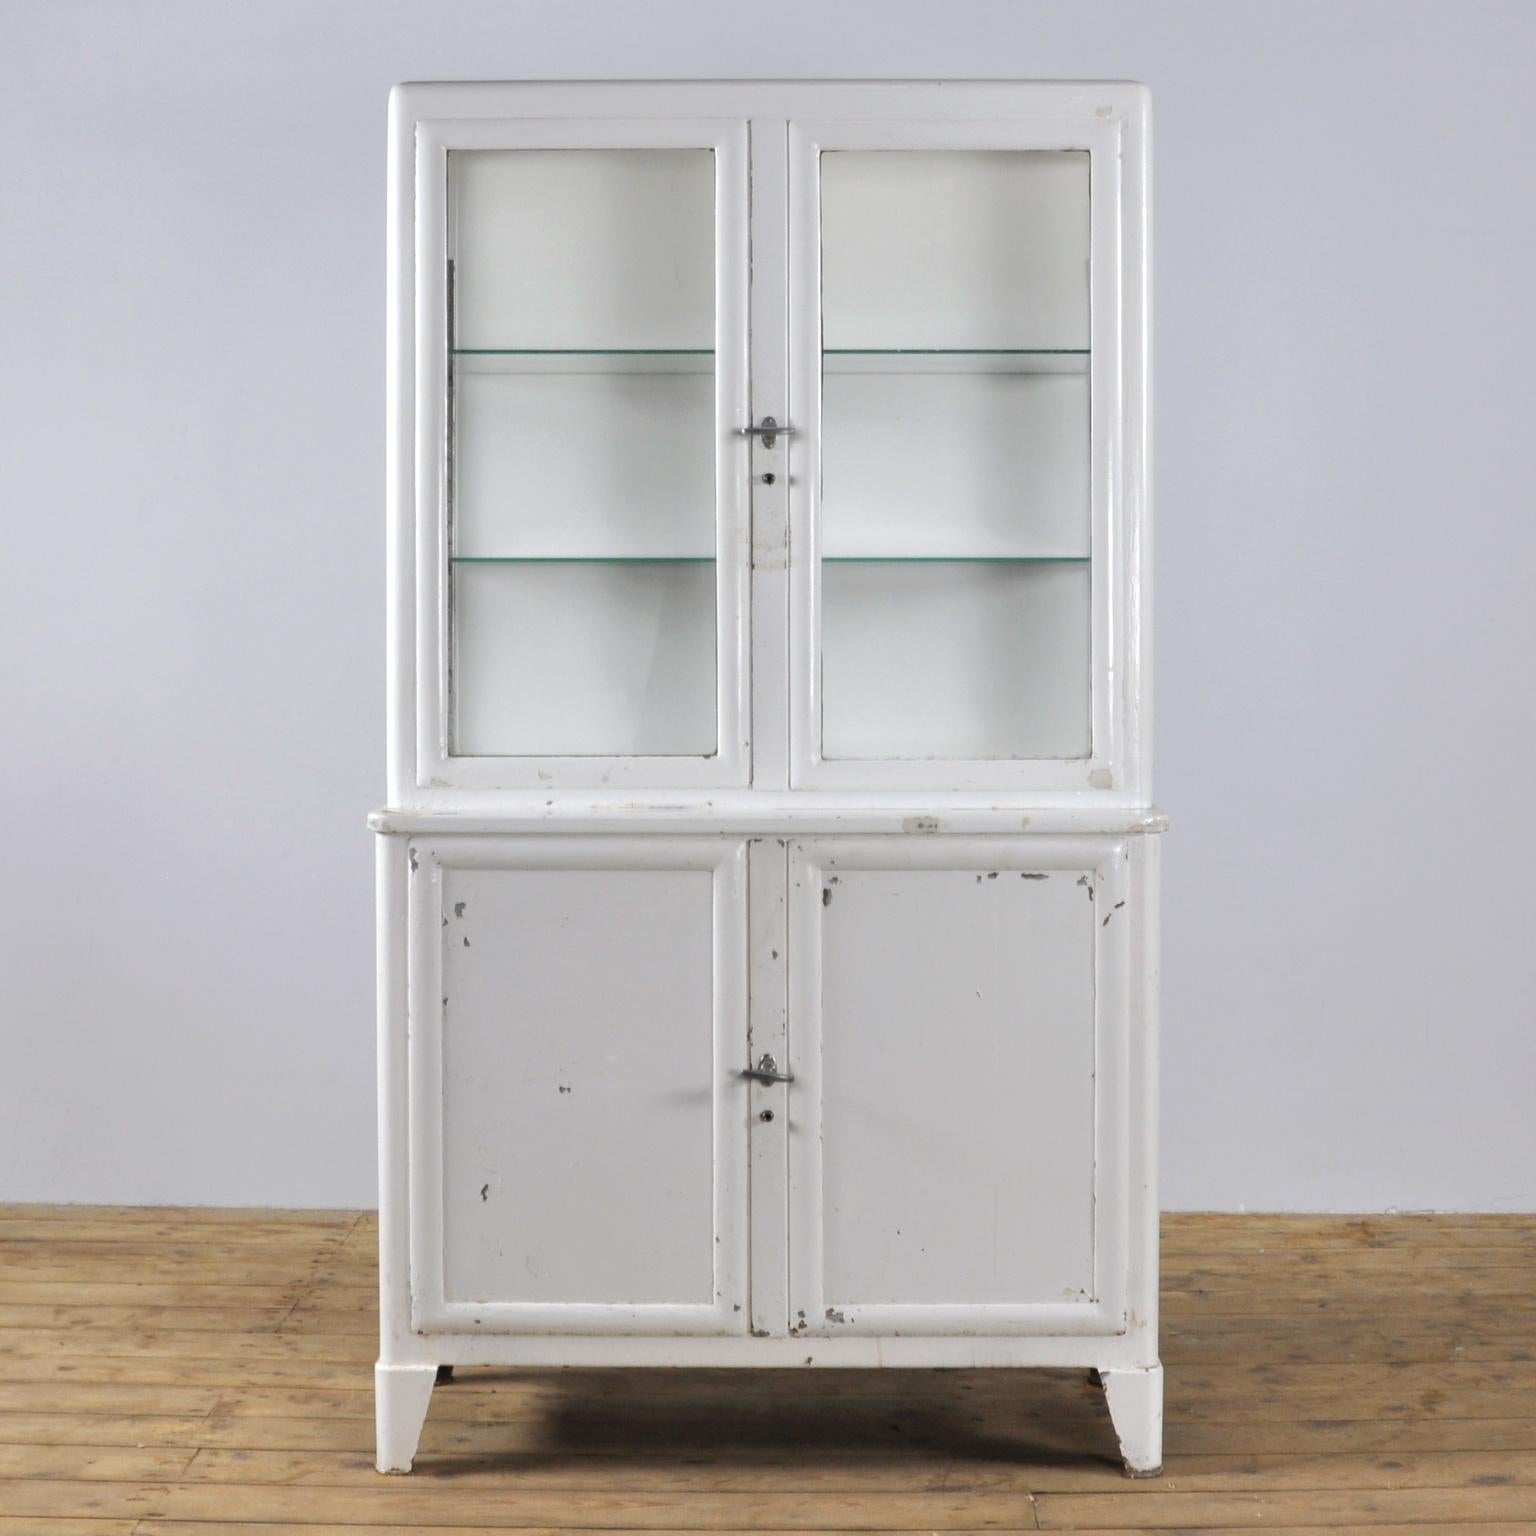 This former medicine cabinet was produced in the 1930s in Hungary and is made from thick iron and antique glass. It features two glass shelves.